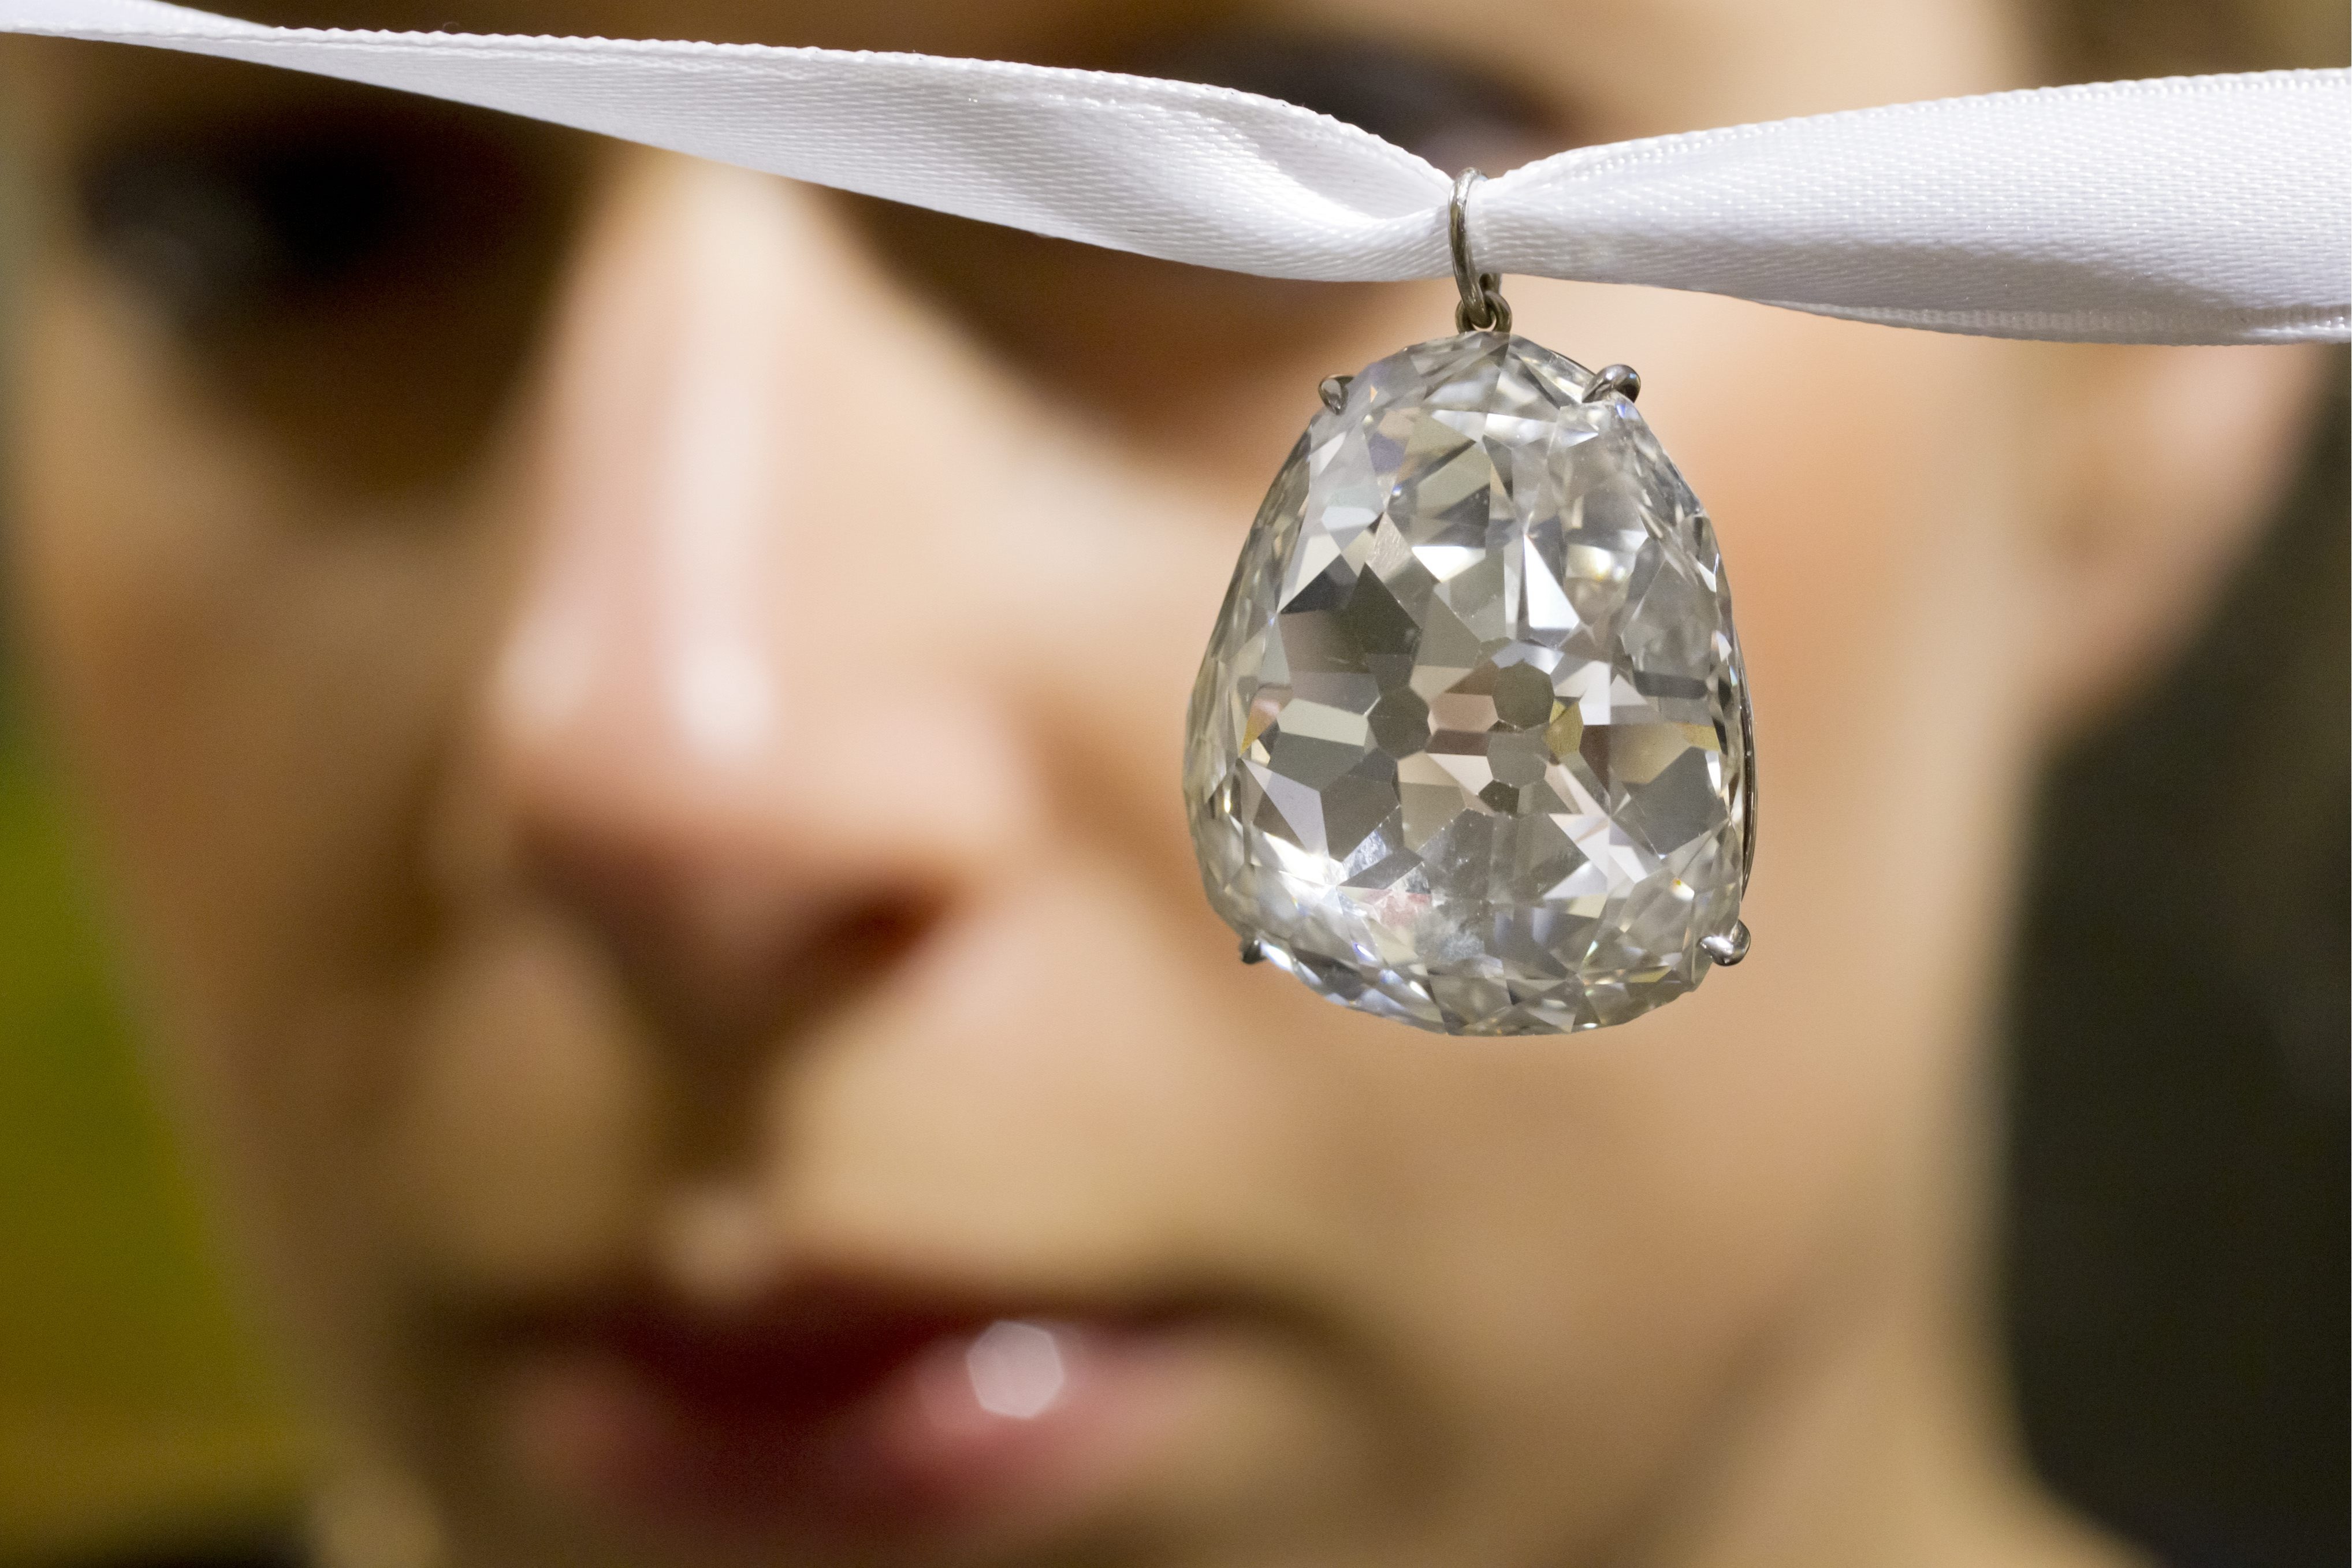 FILE - In this May 2, 2012 file photo an employee shows the Beau Sancy diamond, 34.98 carat,  at Sotheby's auction house in Zurich, Switzerland. Marie de Medici wore it at her coronation as Queen Consort of Henry IV in 1610, and now the Beau Sancy diamond is a lavish accessory owned by an anonymous bidder who paid  US $9.7 million  (7.6 million euro) for it at Sothebys auction in Geneva  Tuesday May 15, 2012. The spring auction season for jewelry and watches is upon Geneva, where elegant lakefront hotels fill with well-heeled buyers and bidders in a scene far removed from the debate over European austerity.   (AP Photo / Keystone, Alessandro Della Bella, File)